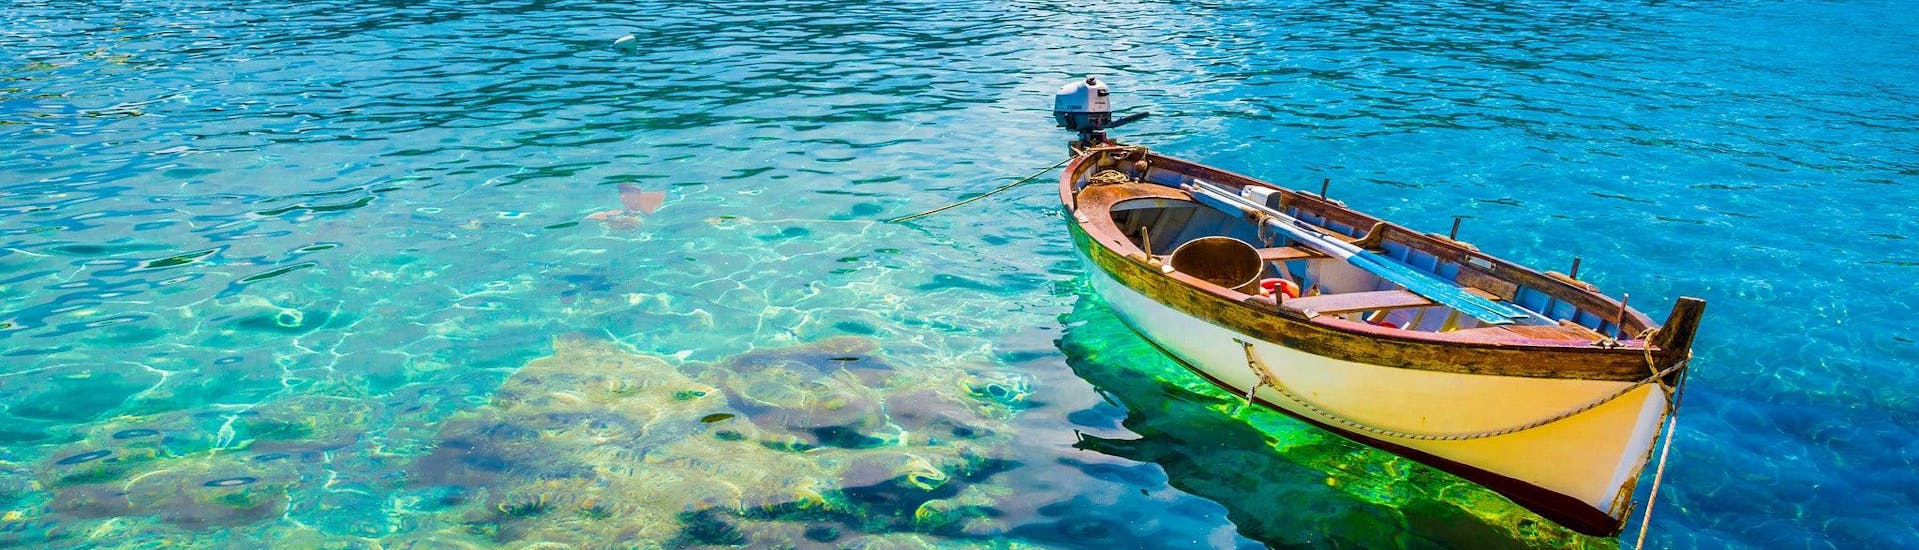 A boat is floating in the clear waters of fetovaia which is a popular destination for boat trips.